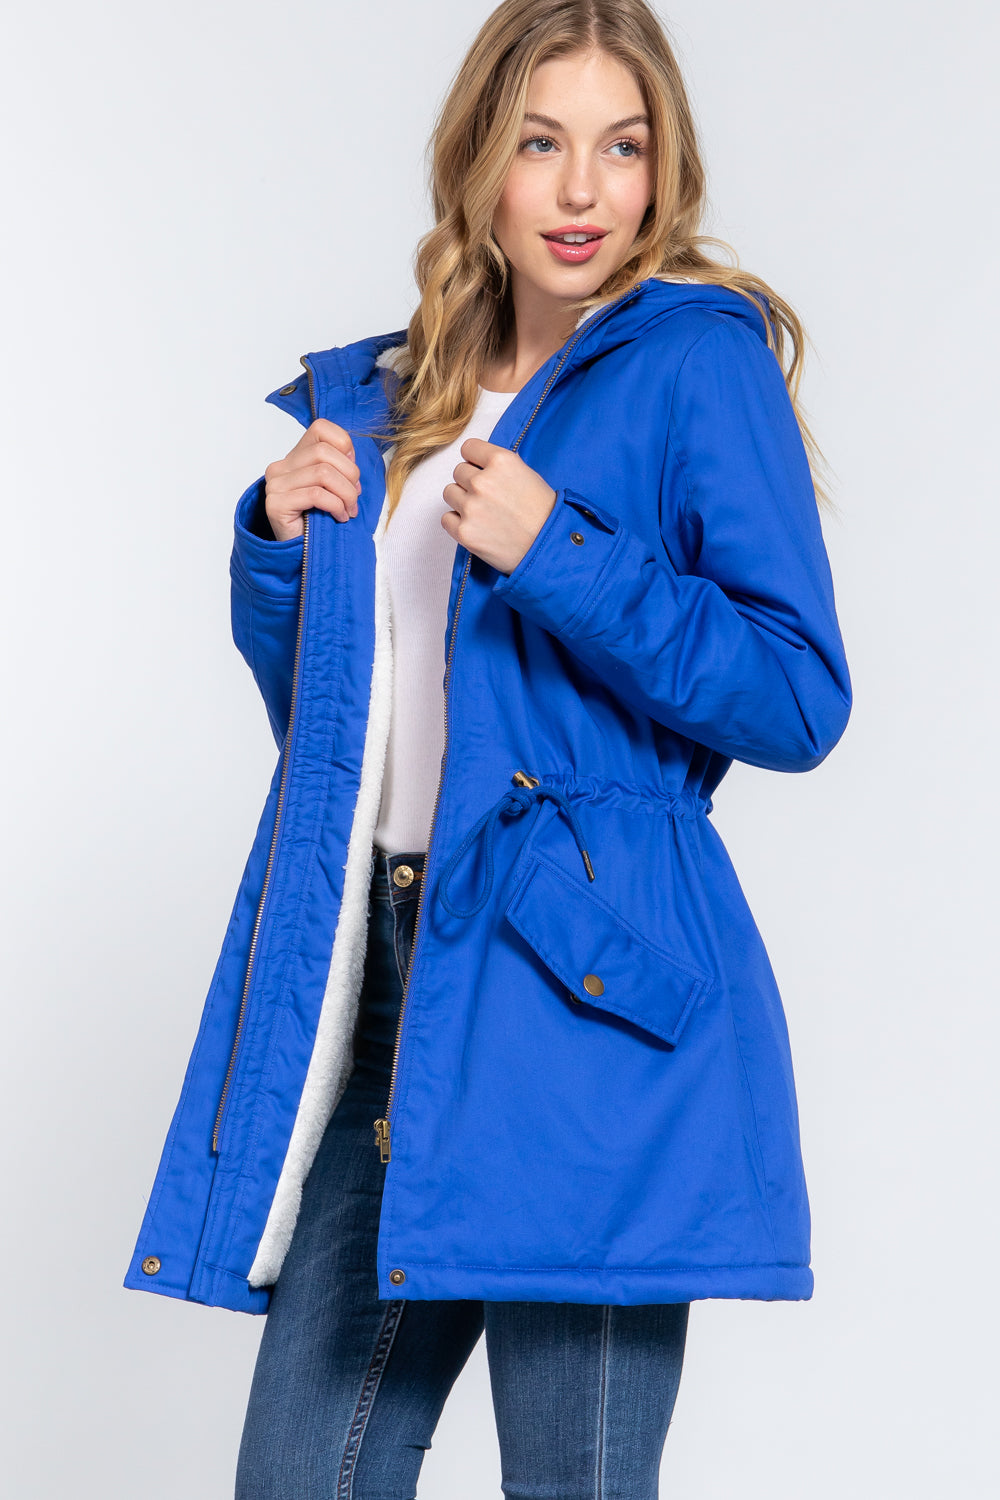 Royal L - Fleece Lined Fur Hoodie Utility Jacket - 4 colors - womens jacket at TFC&H Co.